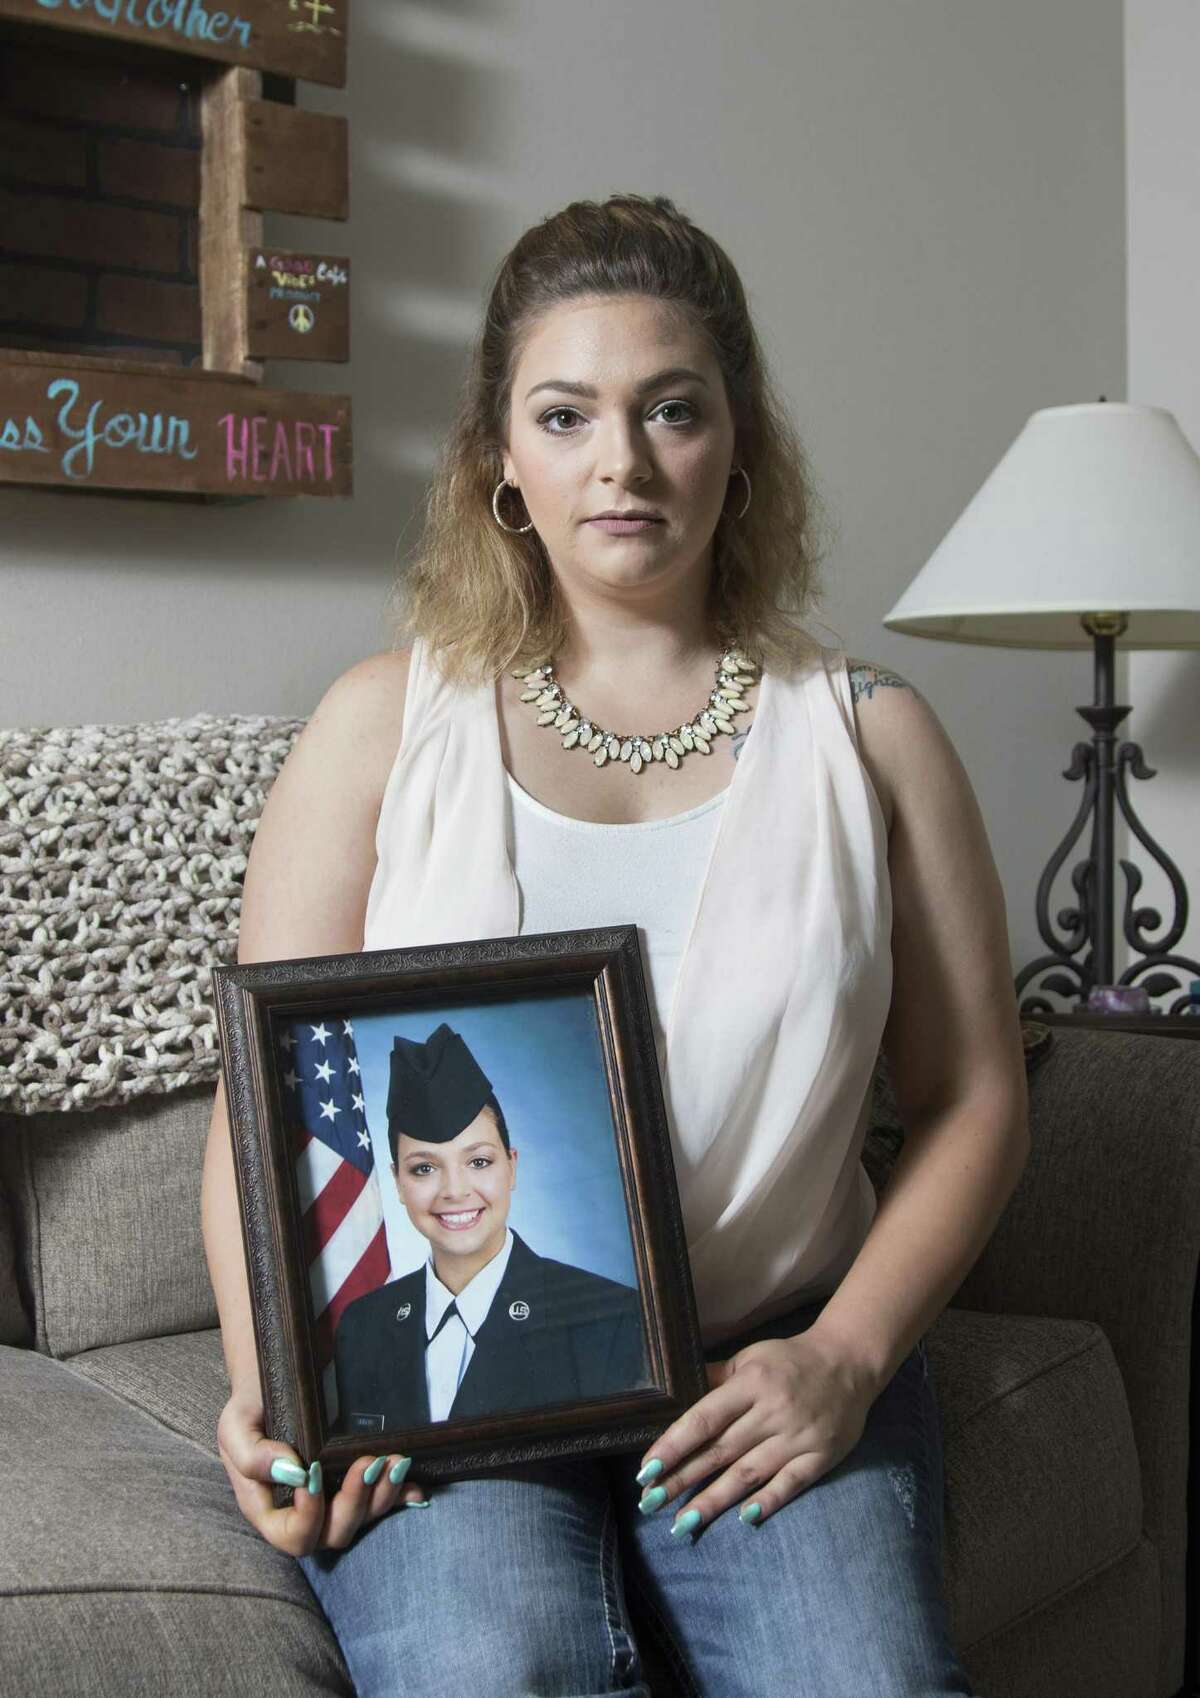 Former Air Force recruit Virginia Messick holds a portrait of herself in uniform at her home in Baker, Florida on Friday, October 5, 2018.